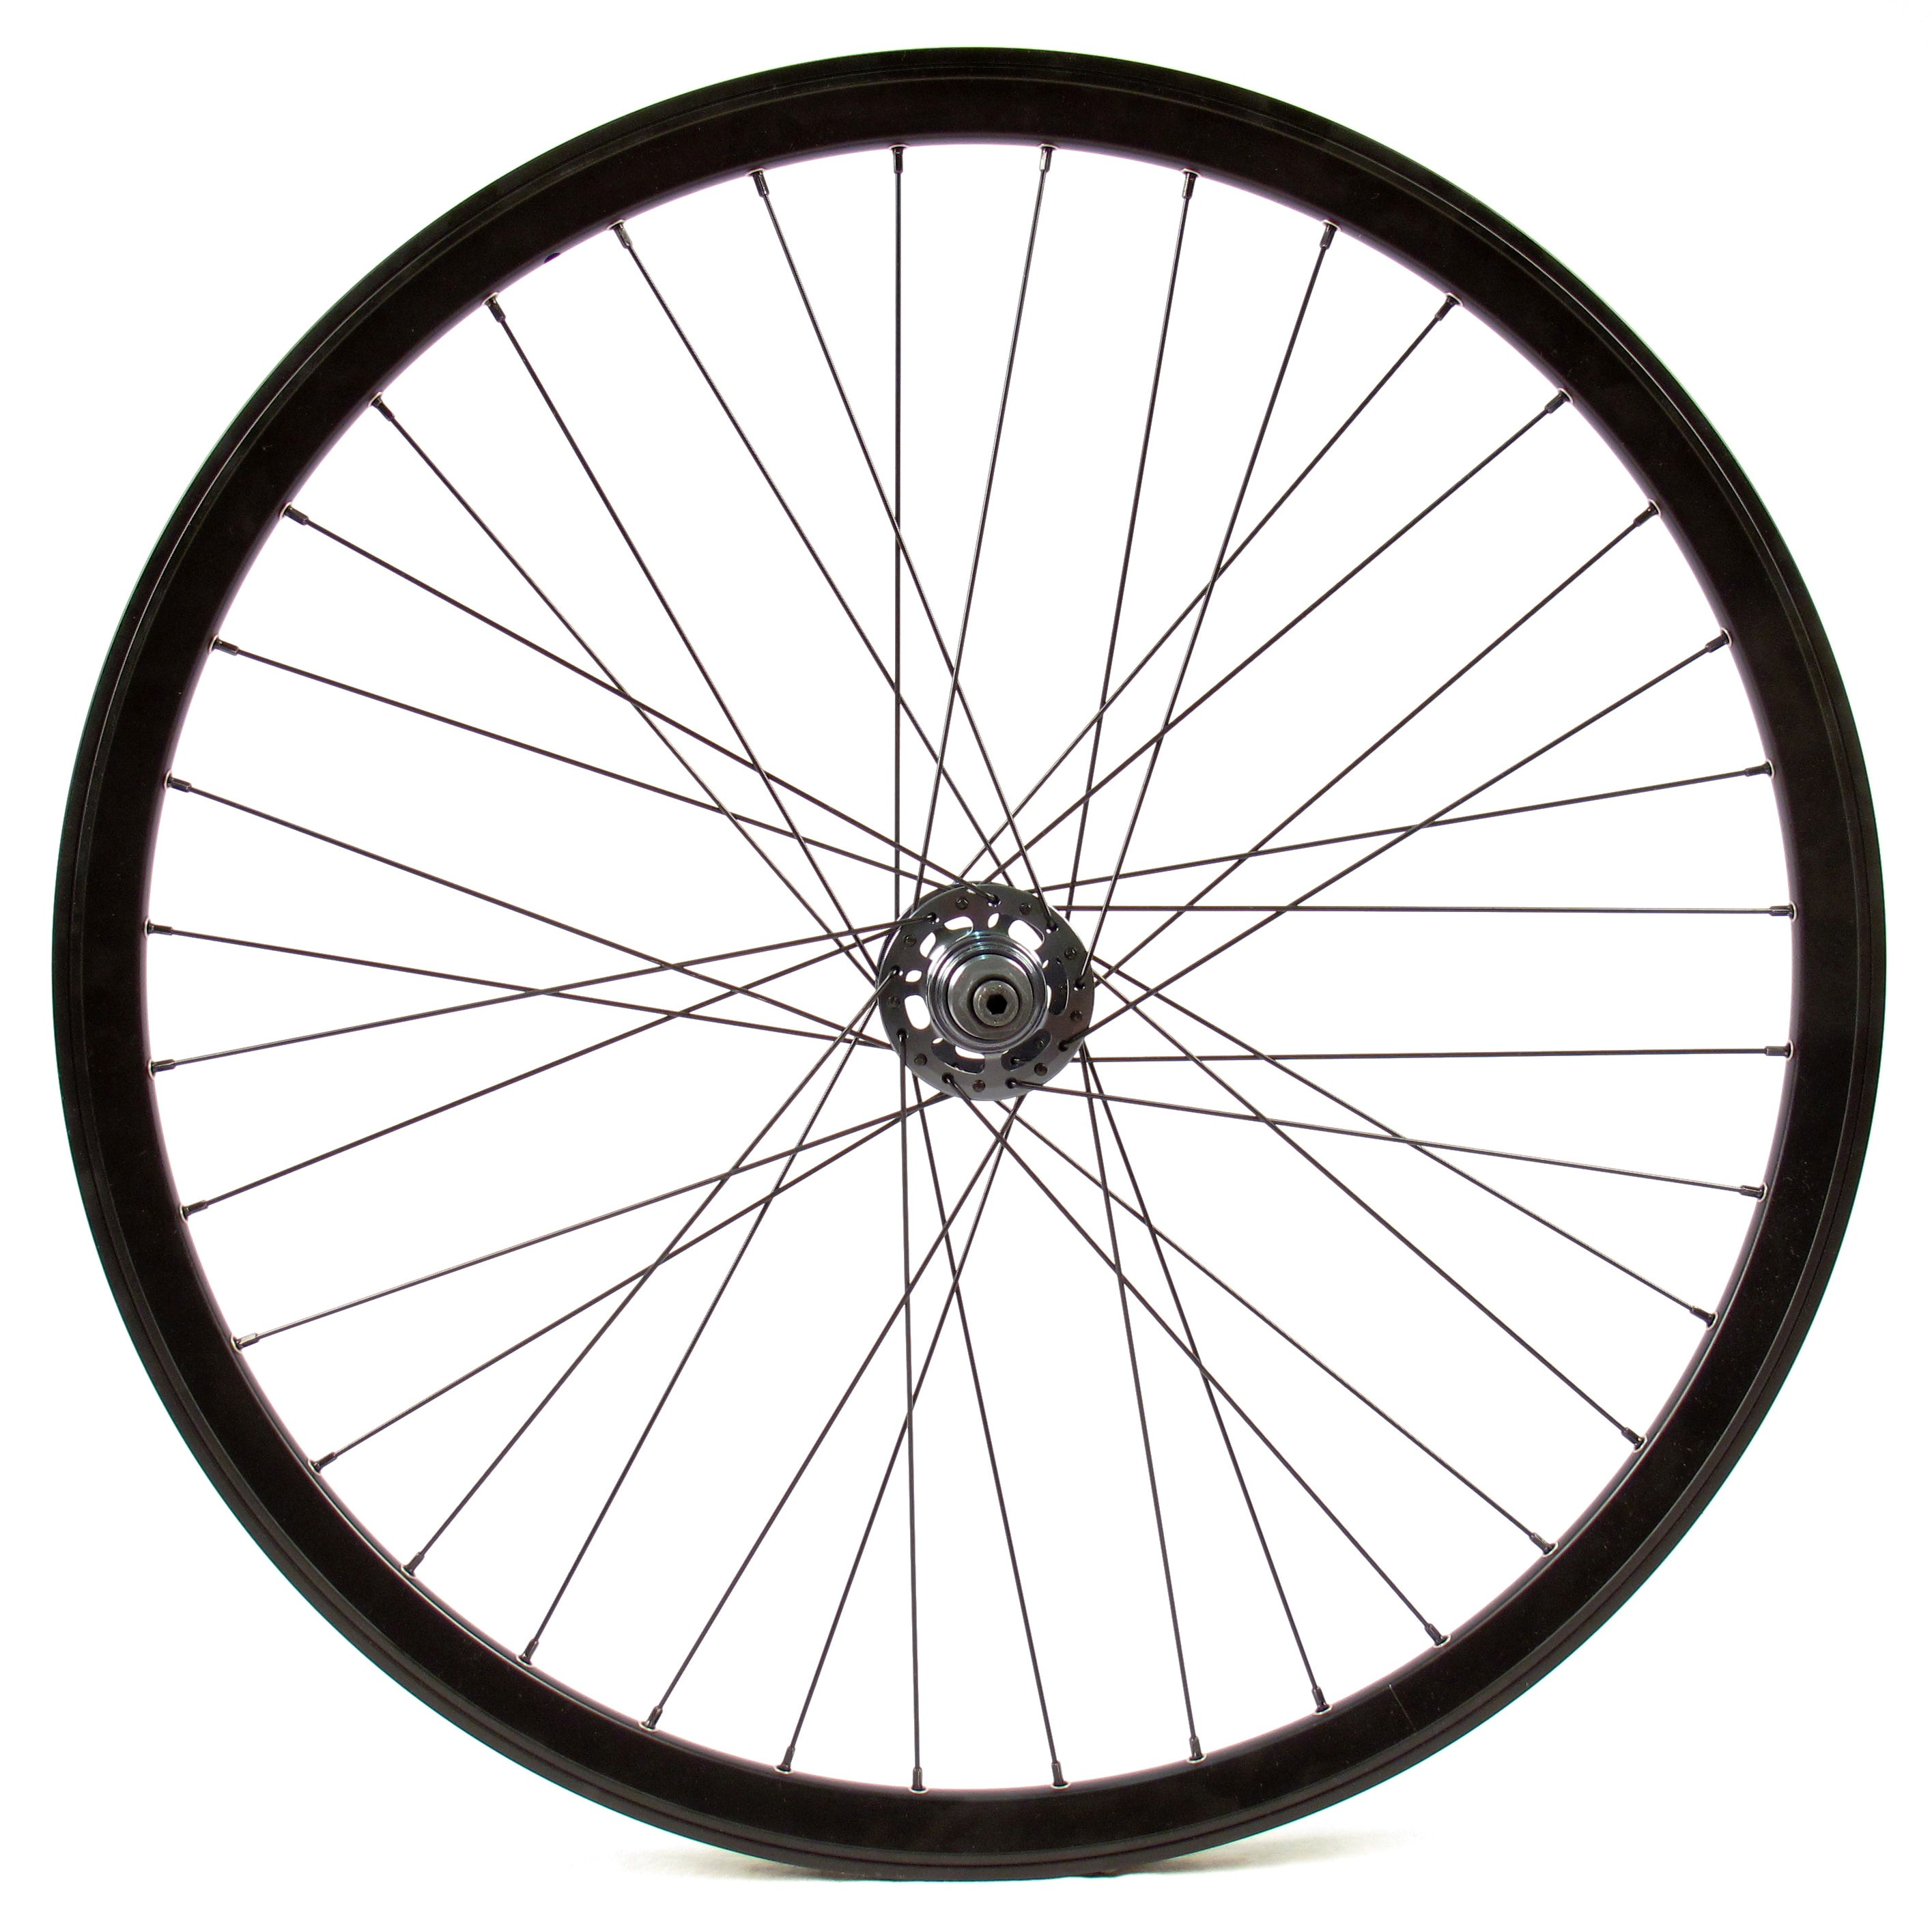 Free Motorcycle Wheel Cliparts, Download Free Clip Art, Free.